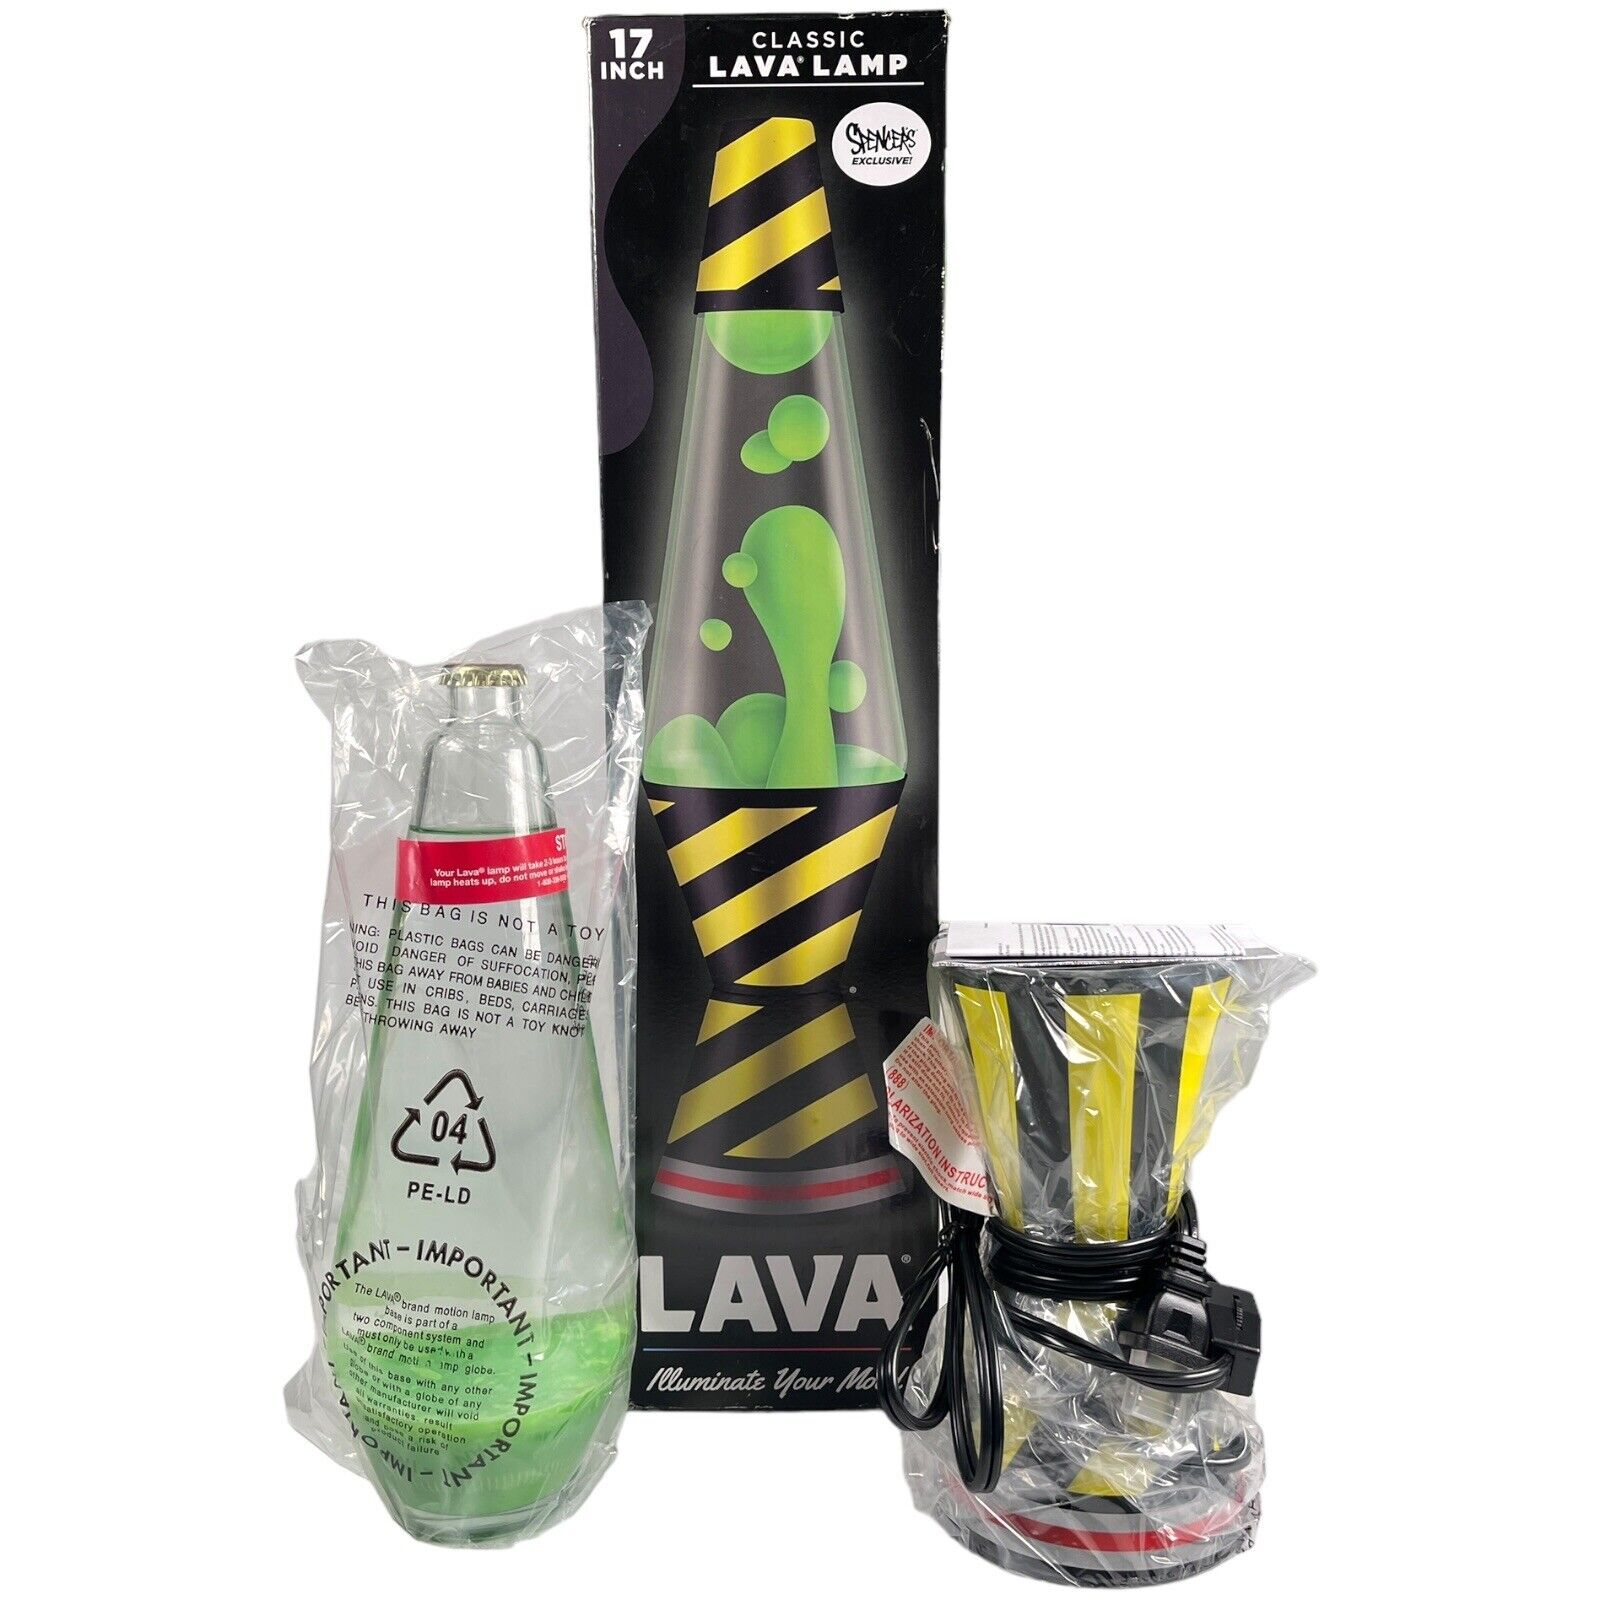 New 17” Classic Green Lava Lamp Caution Tape Decal Spencers Exclusive Schylling